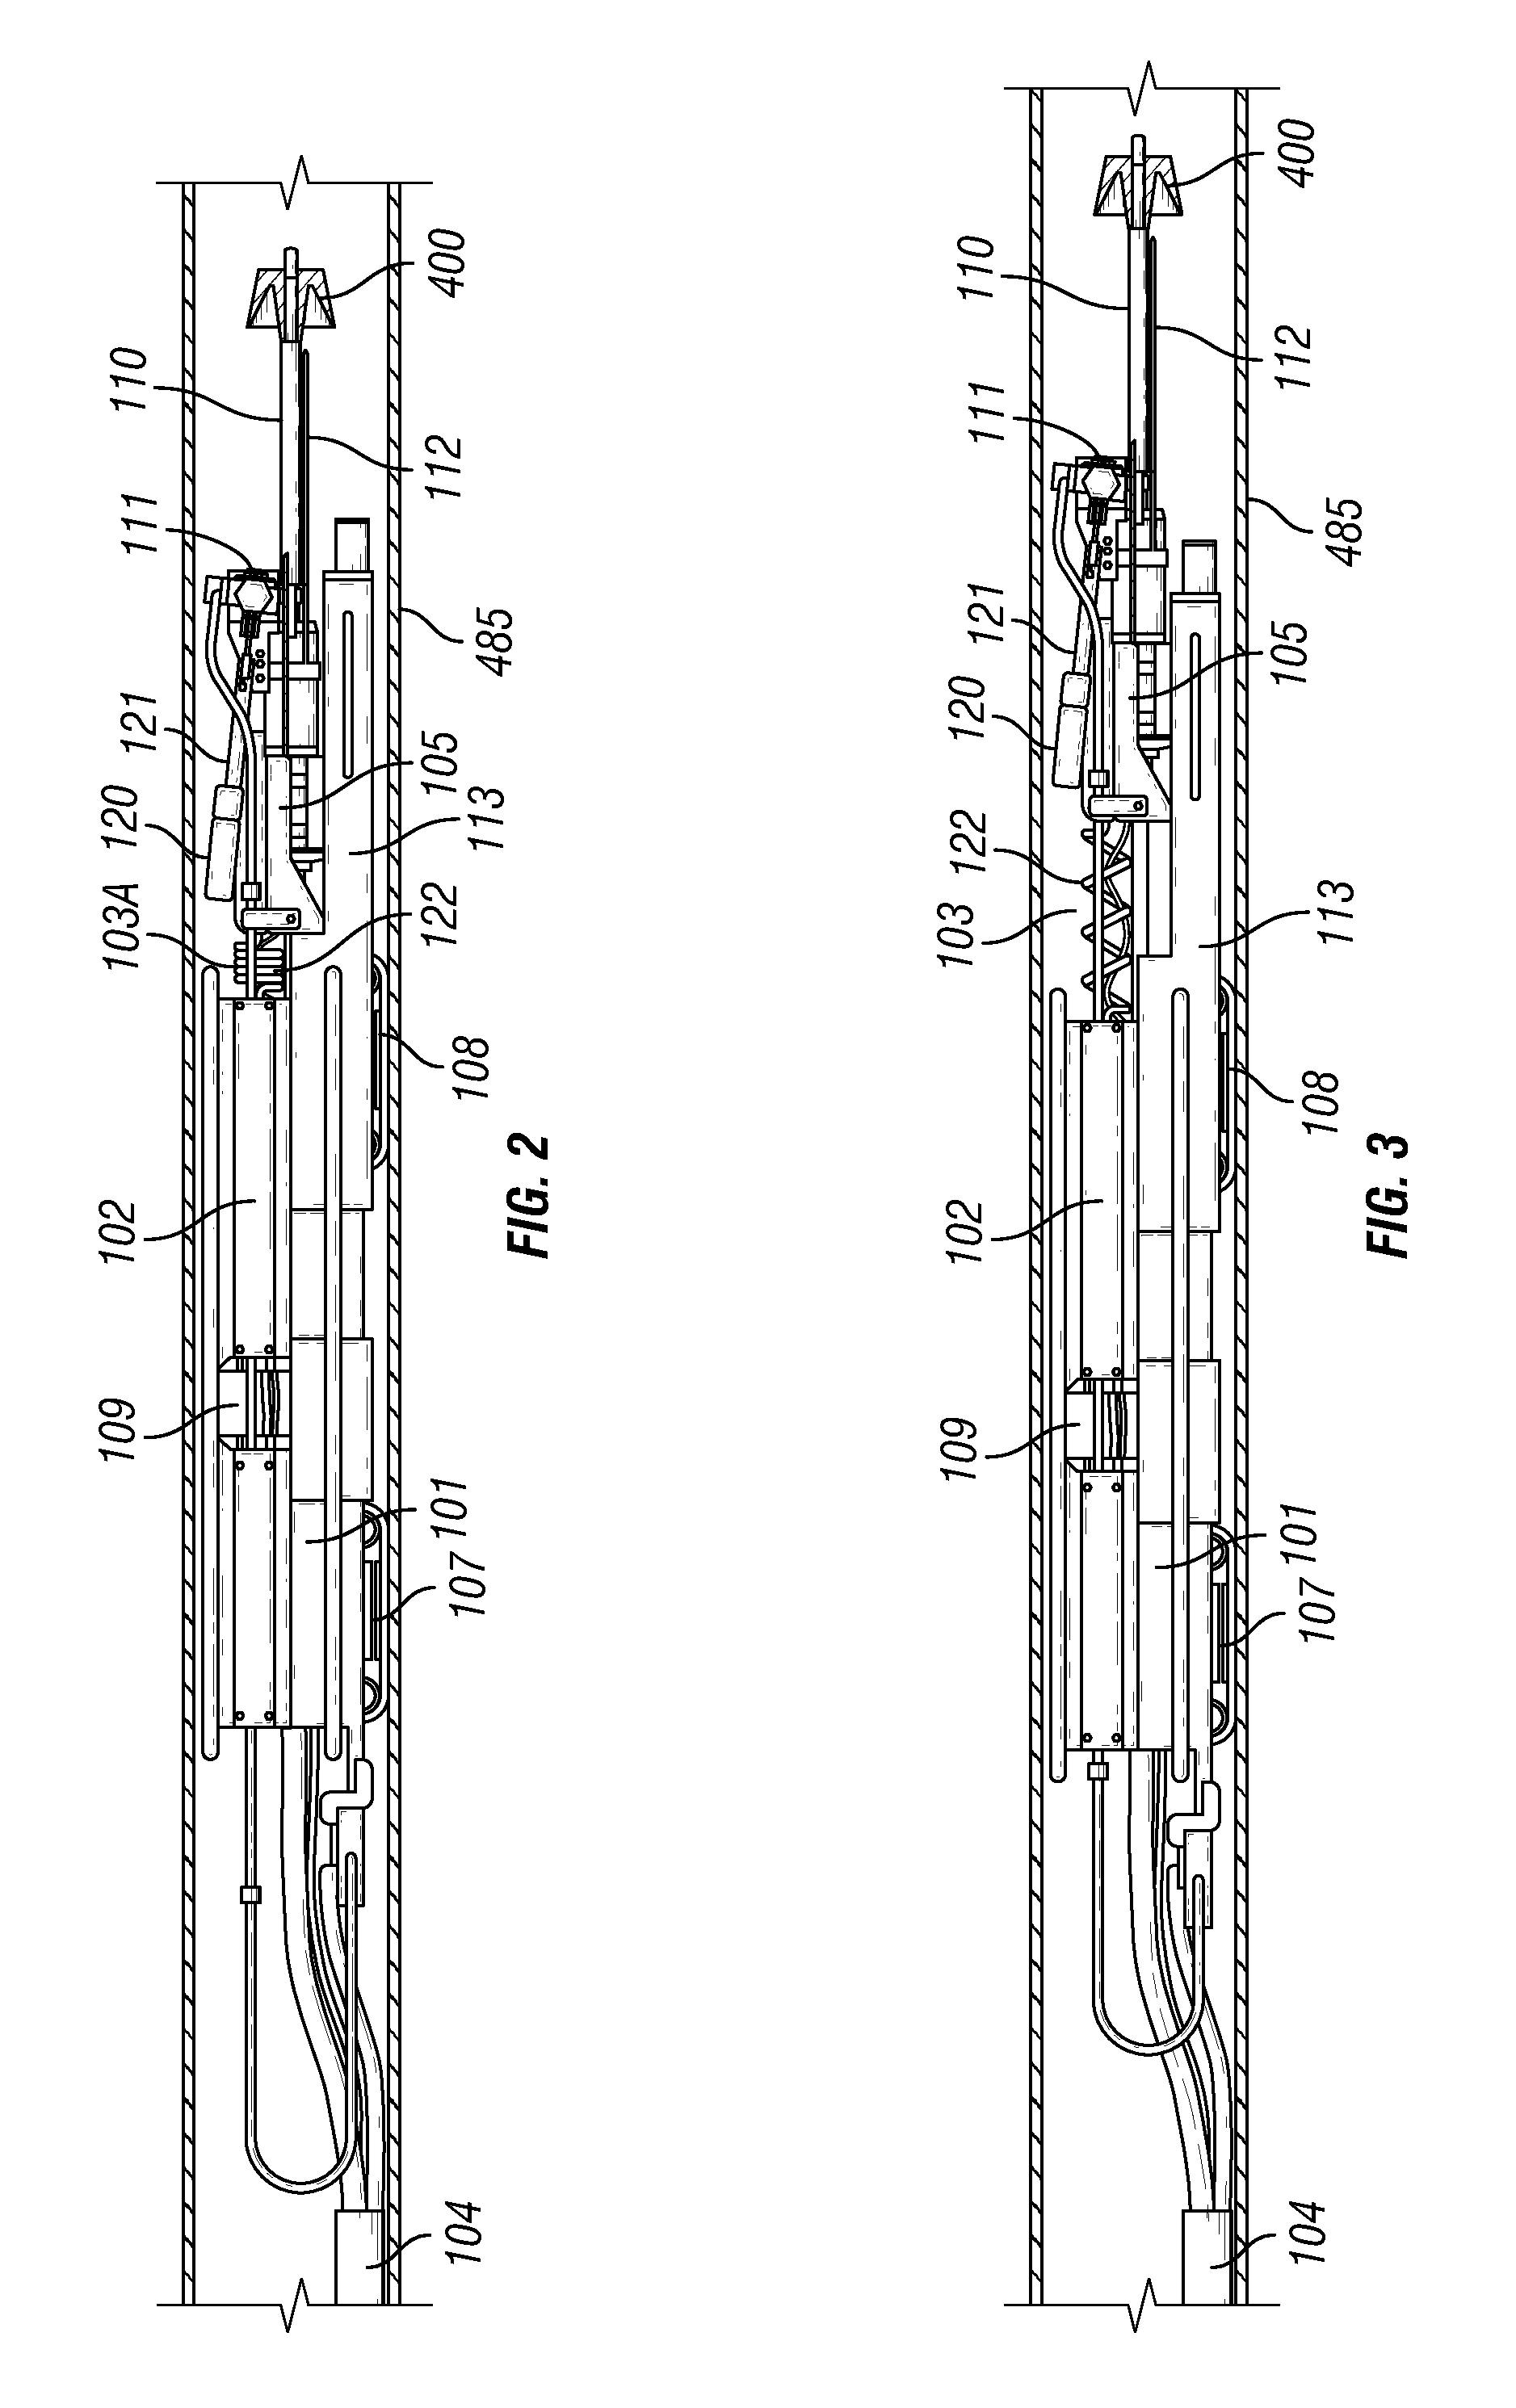 Method and Apparatus for Lining Pipes with Isocyanate and Hydroxyl-Amine Resin Based on Castrol or Soy Oil